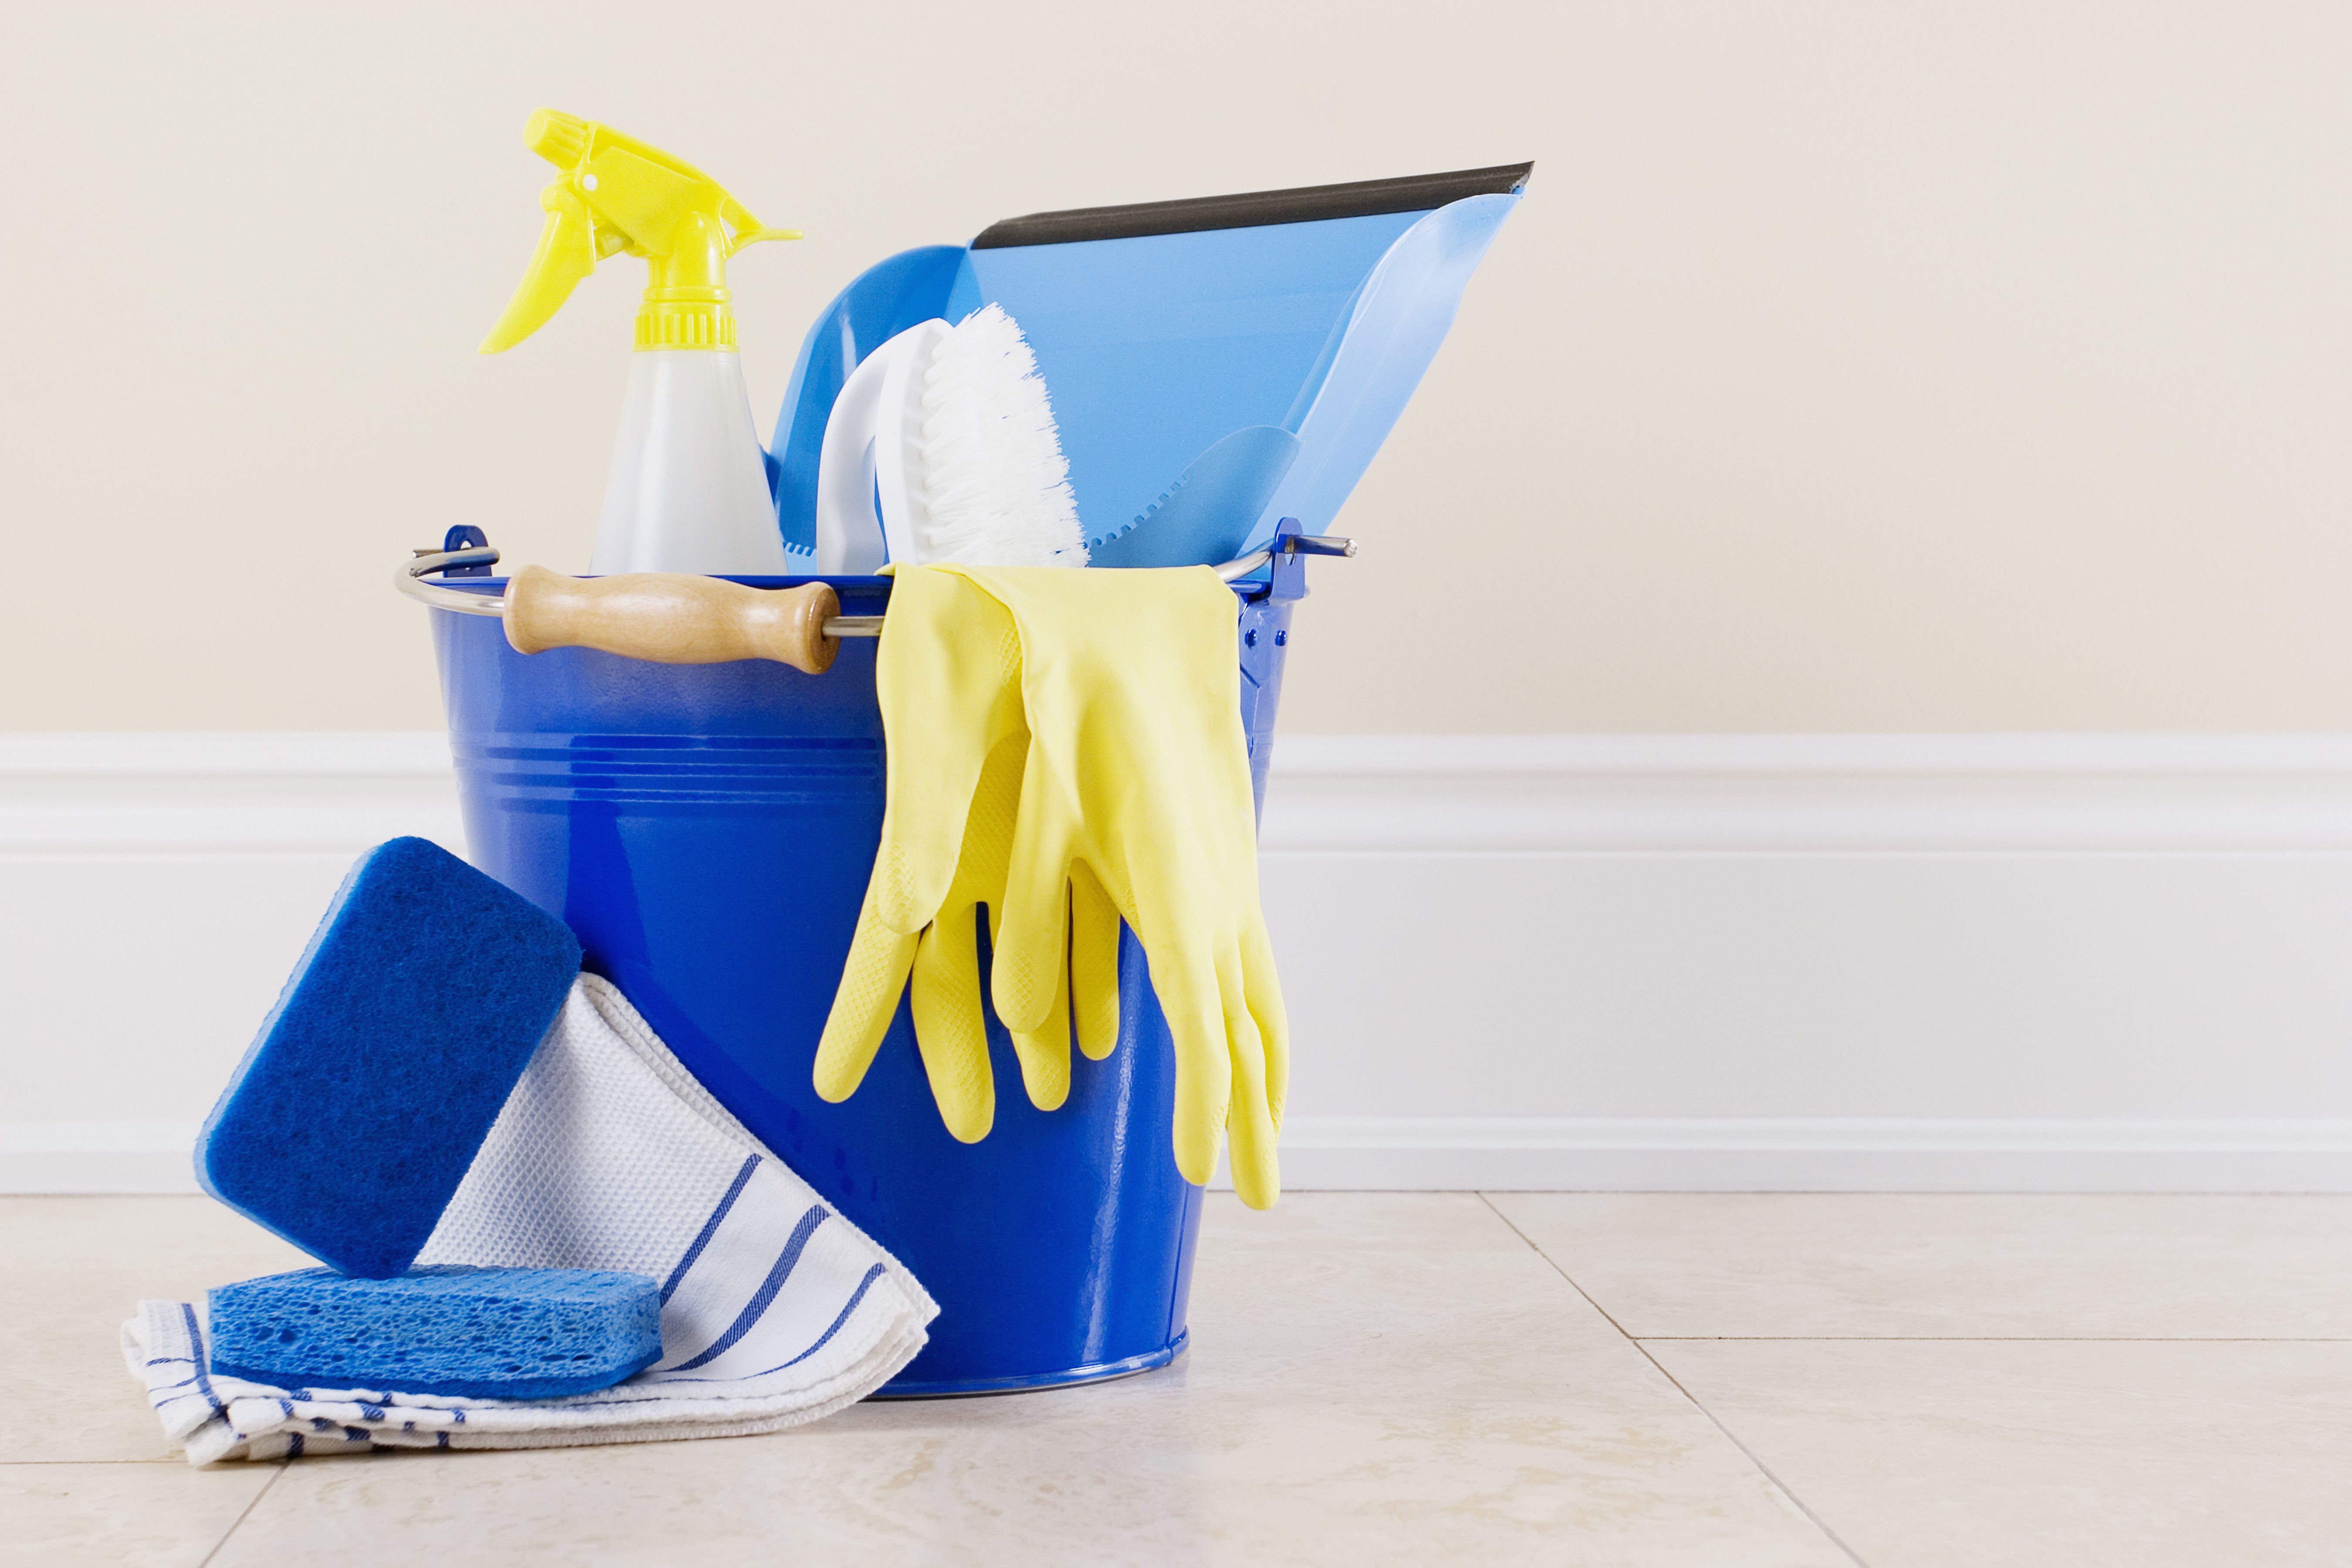 5 Best Cleaning Supplies - The Only Supplies You Need to Clean